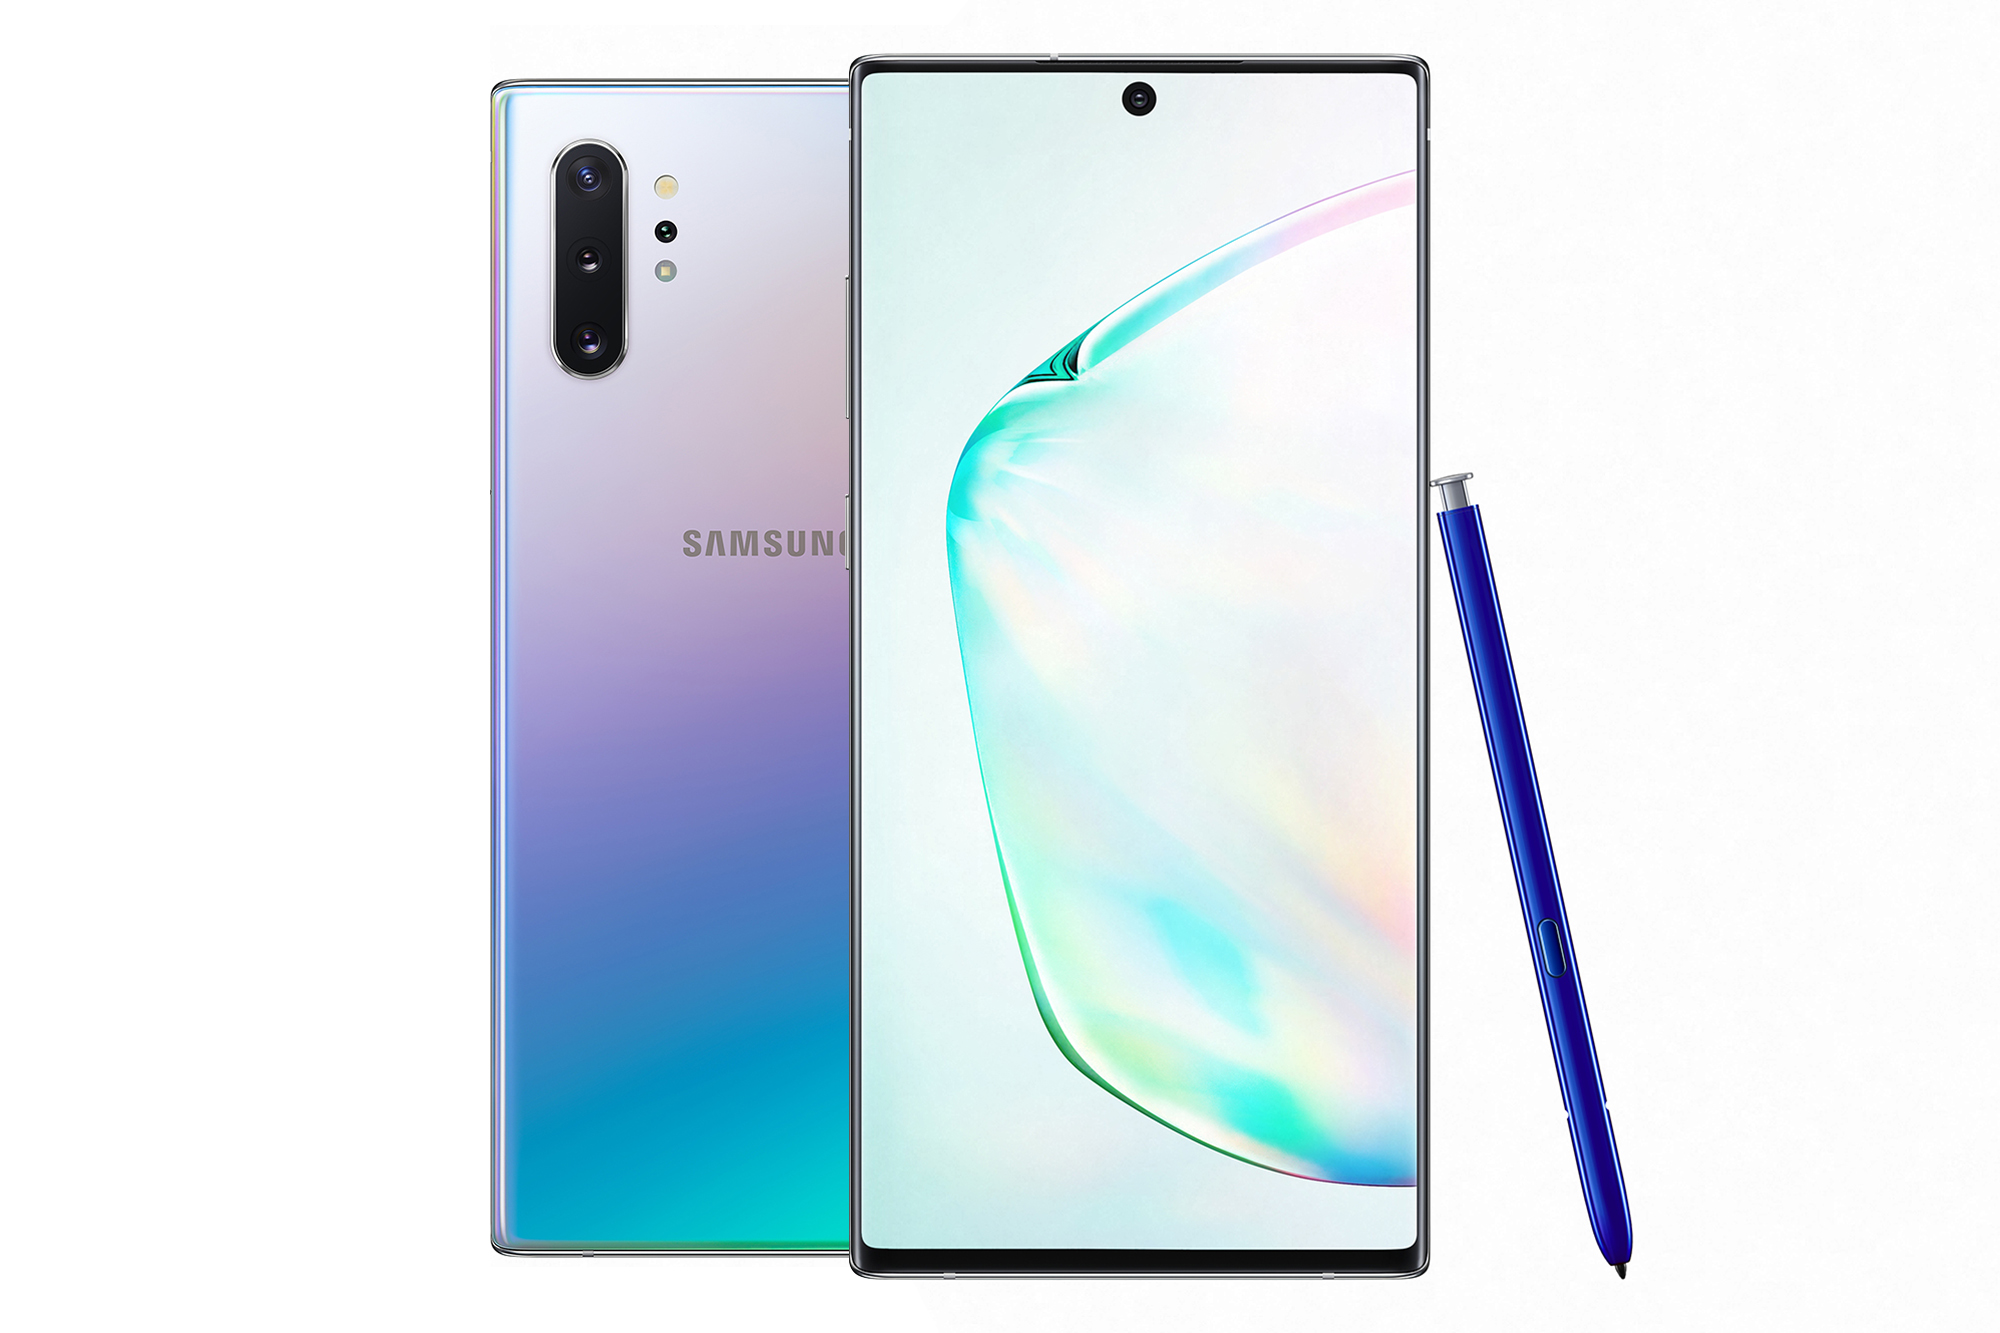 Galaxy Note 10+ in Aura Glow, Image by Samsung